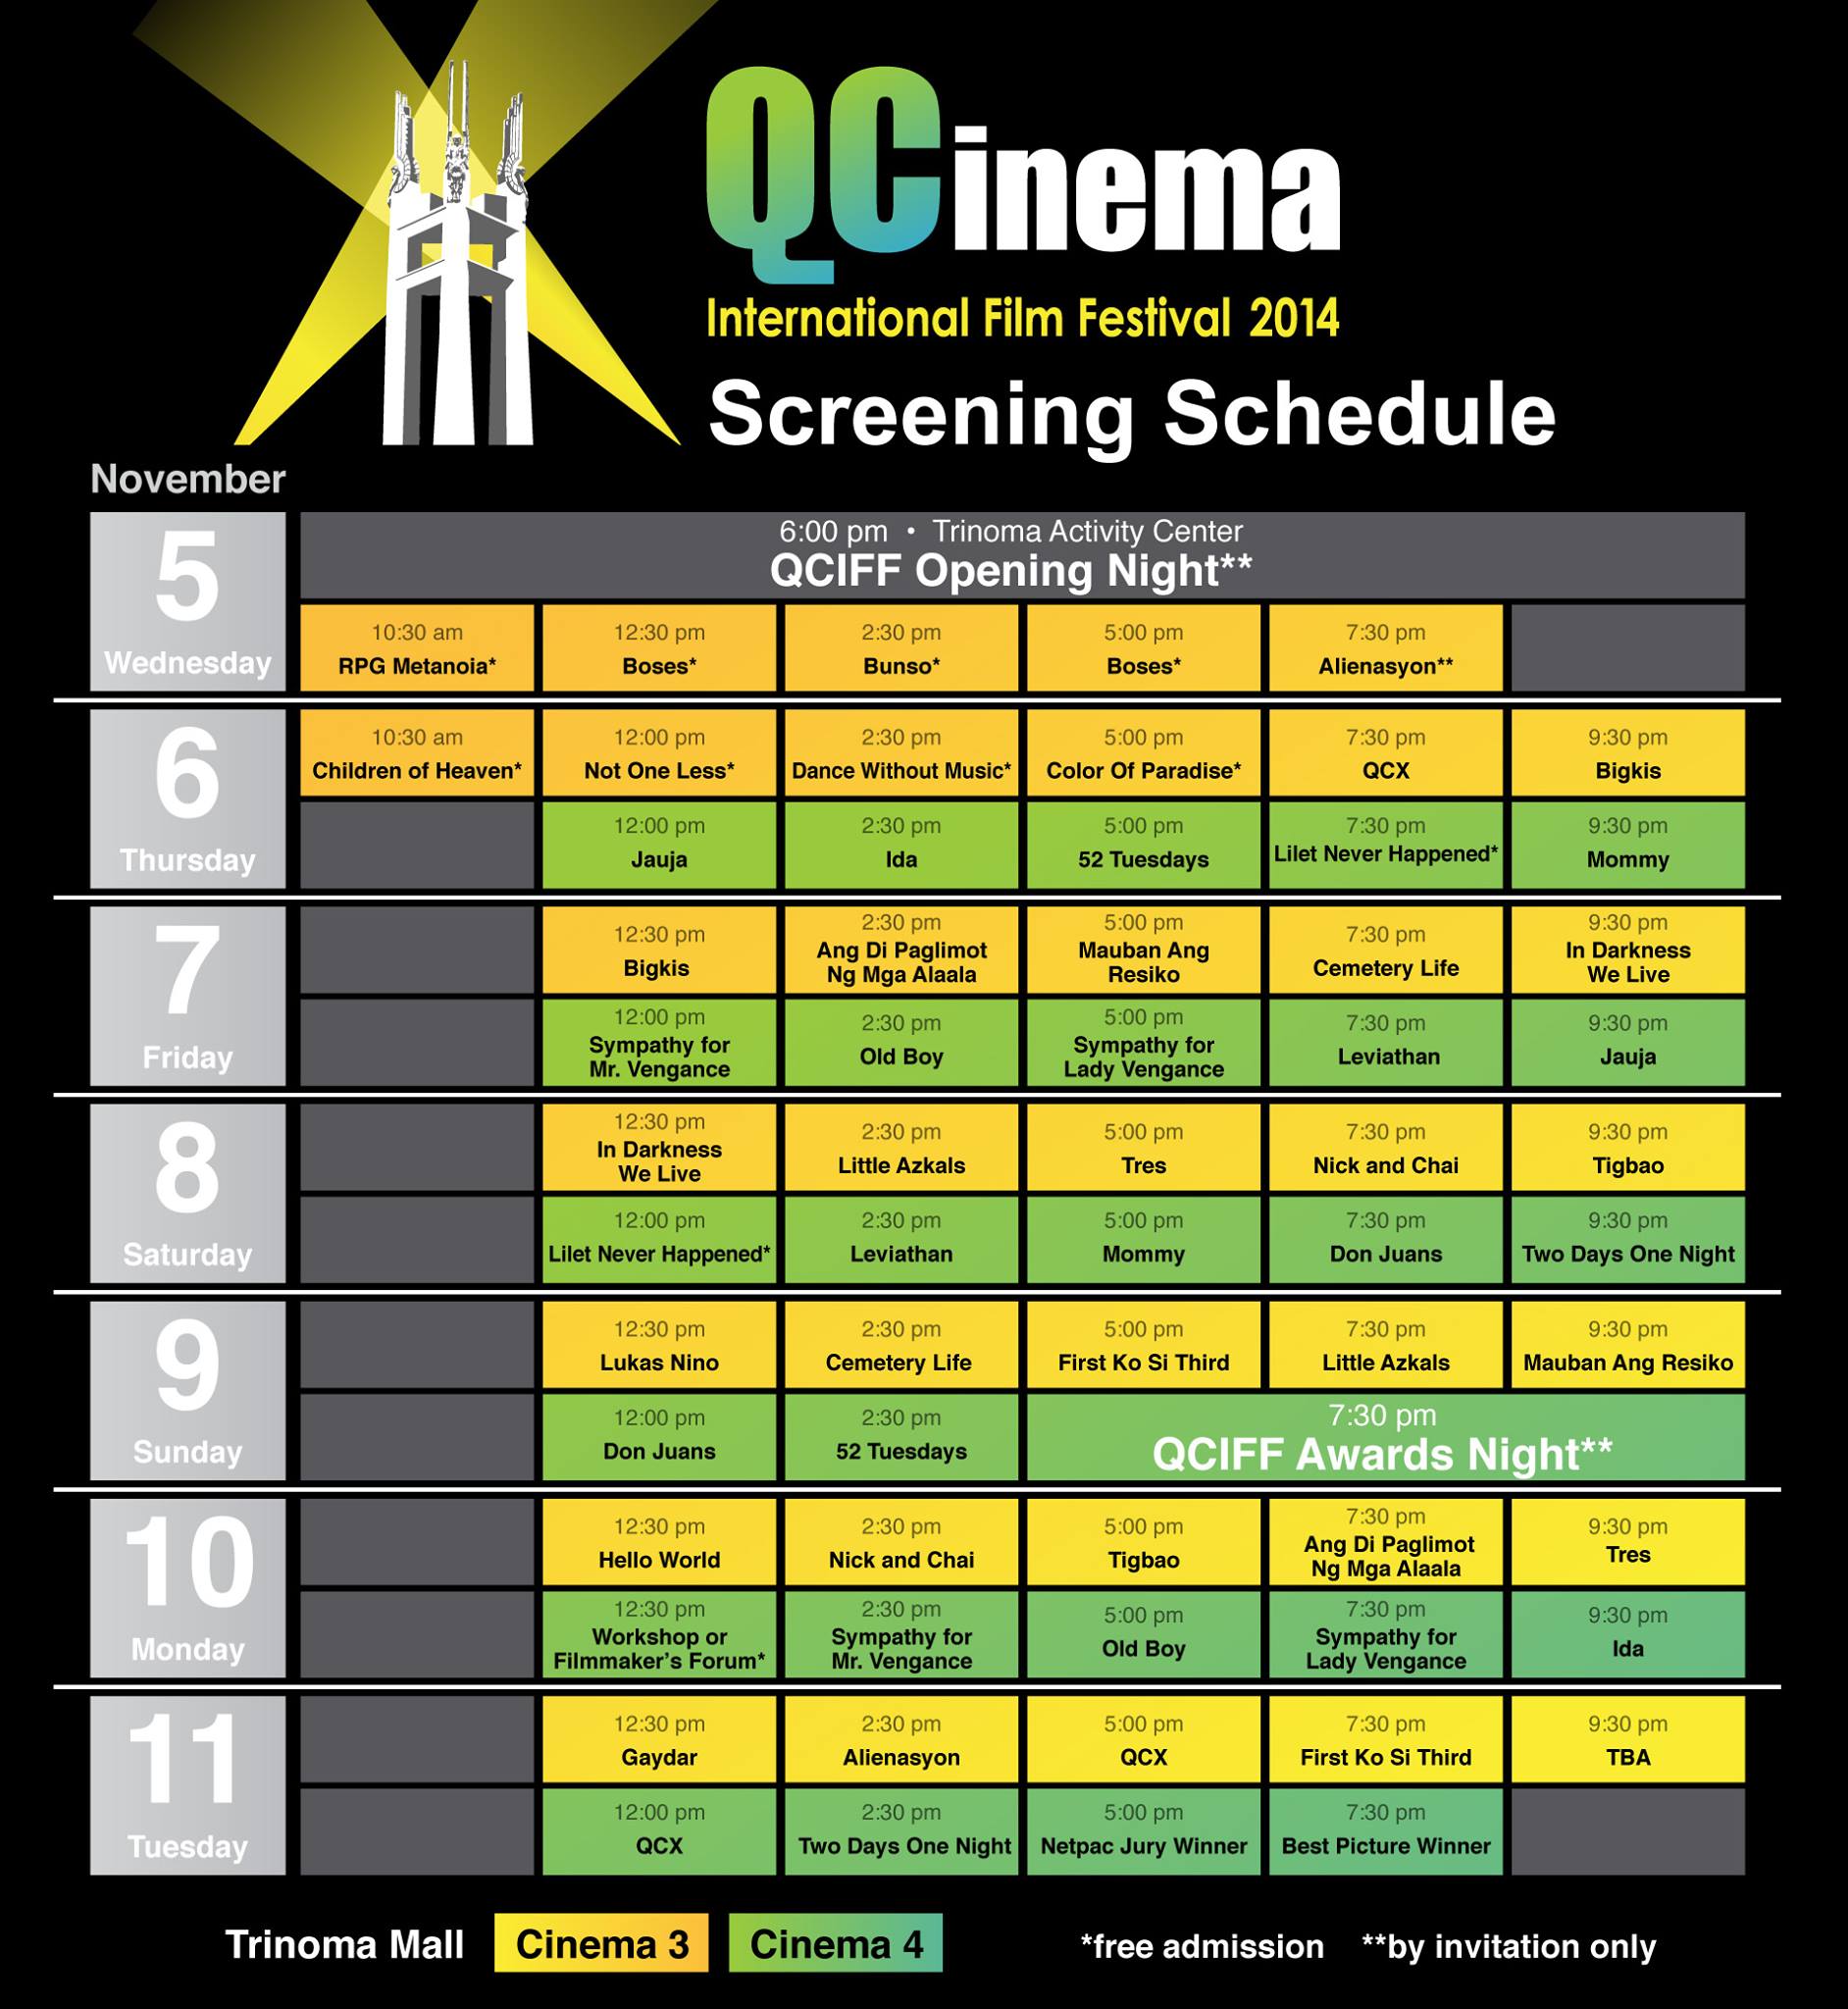 And now, we present: The QCinema Full Schedule. Nov. 5-11, Trinoma.